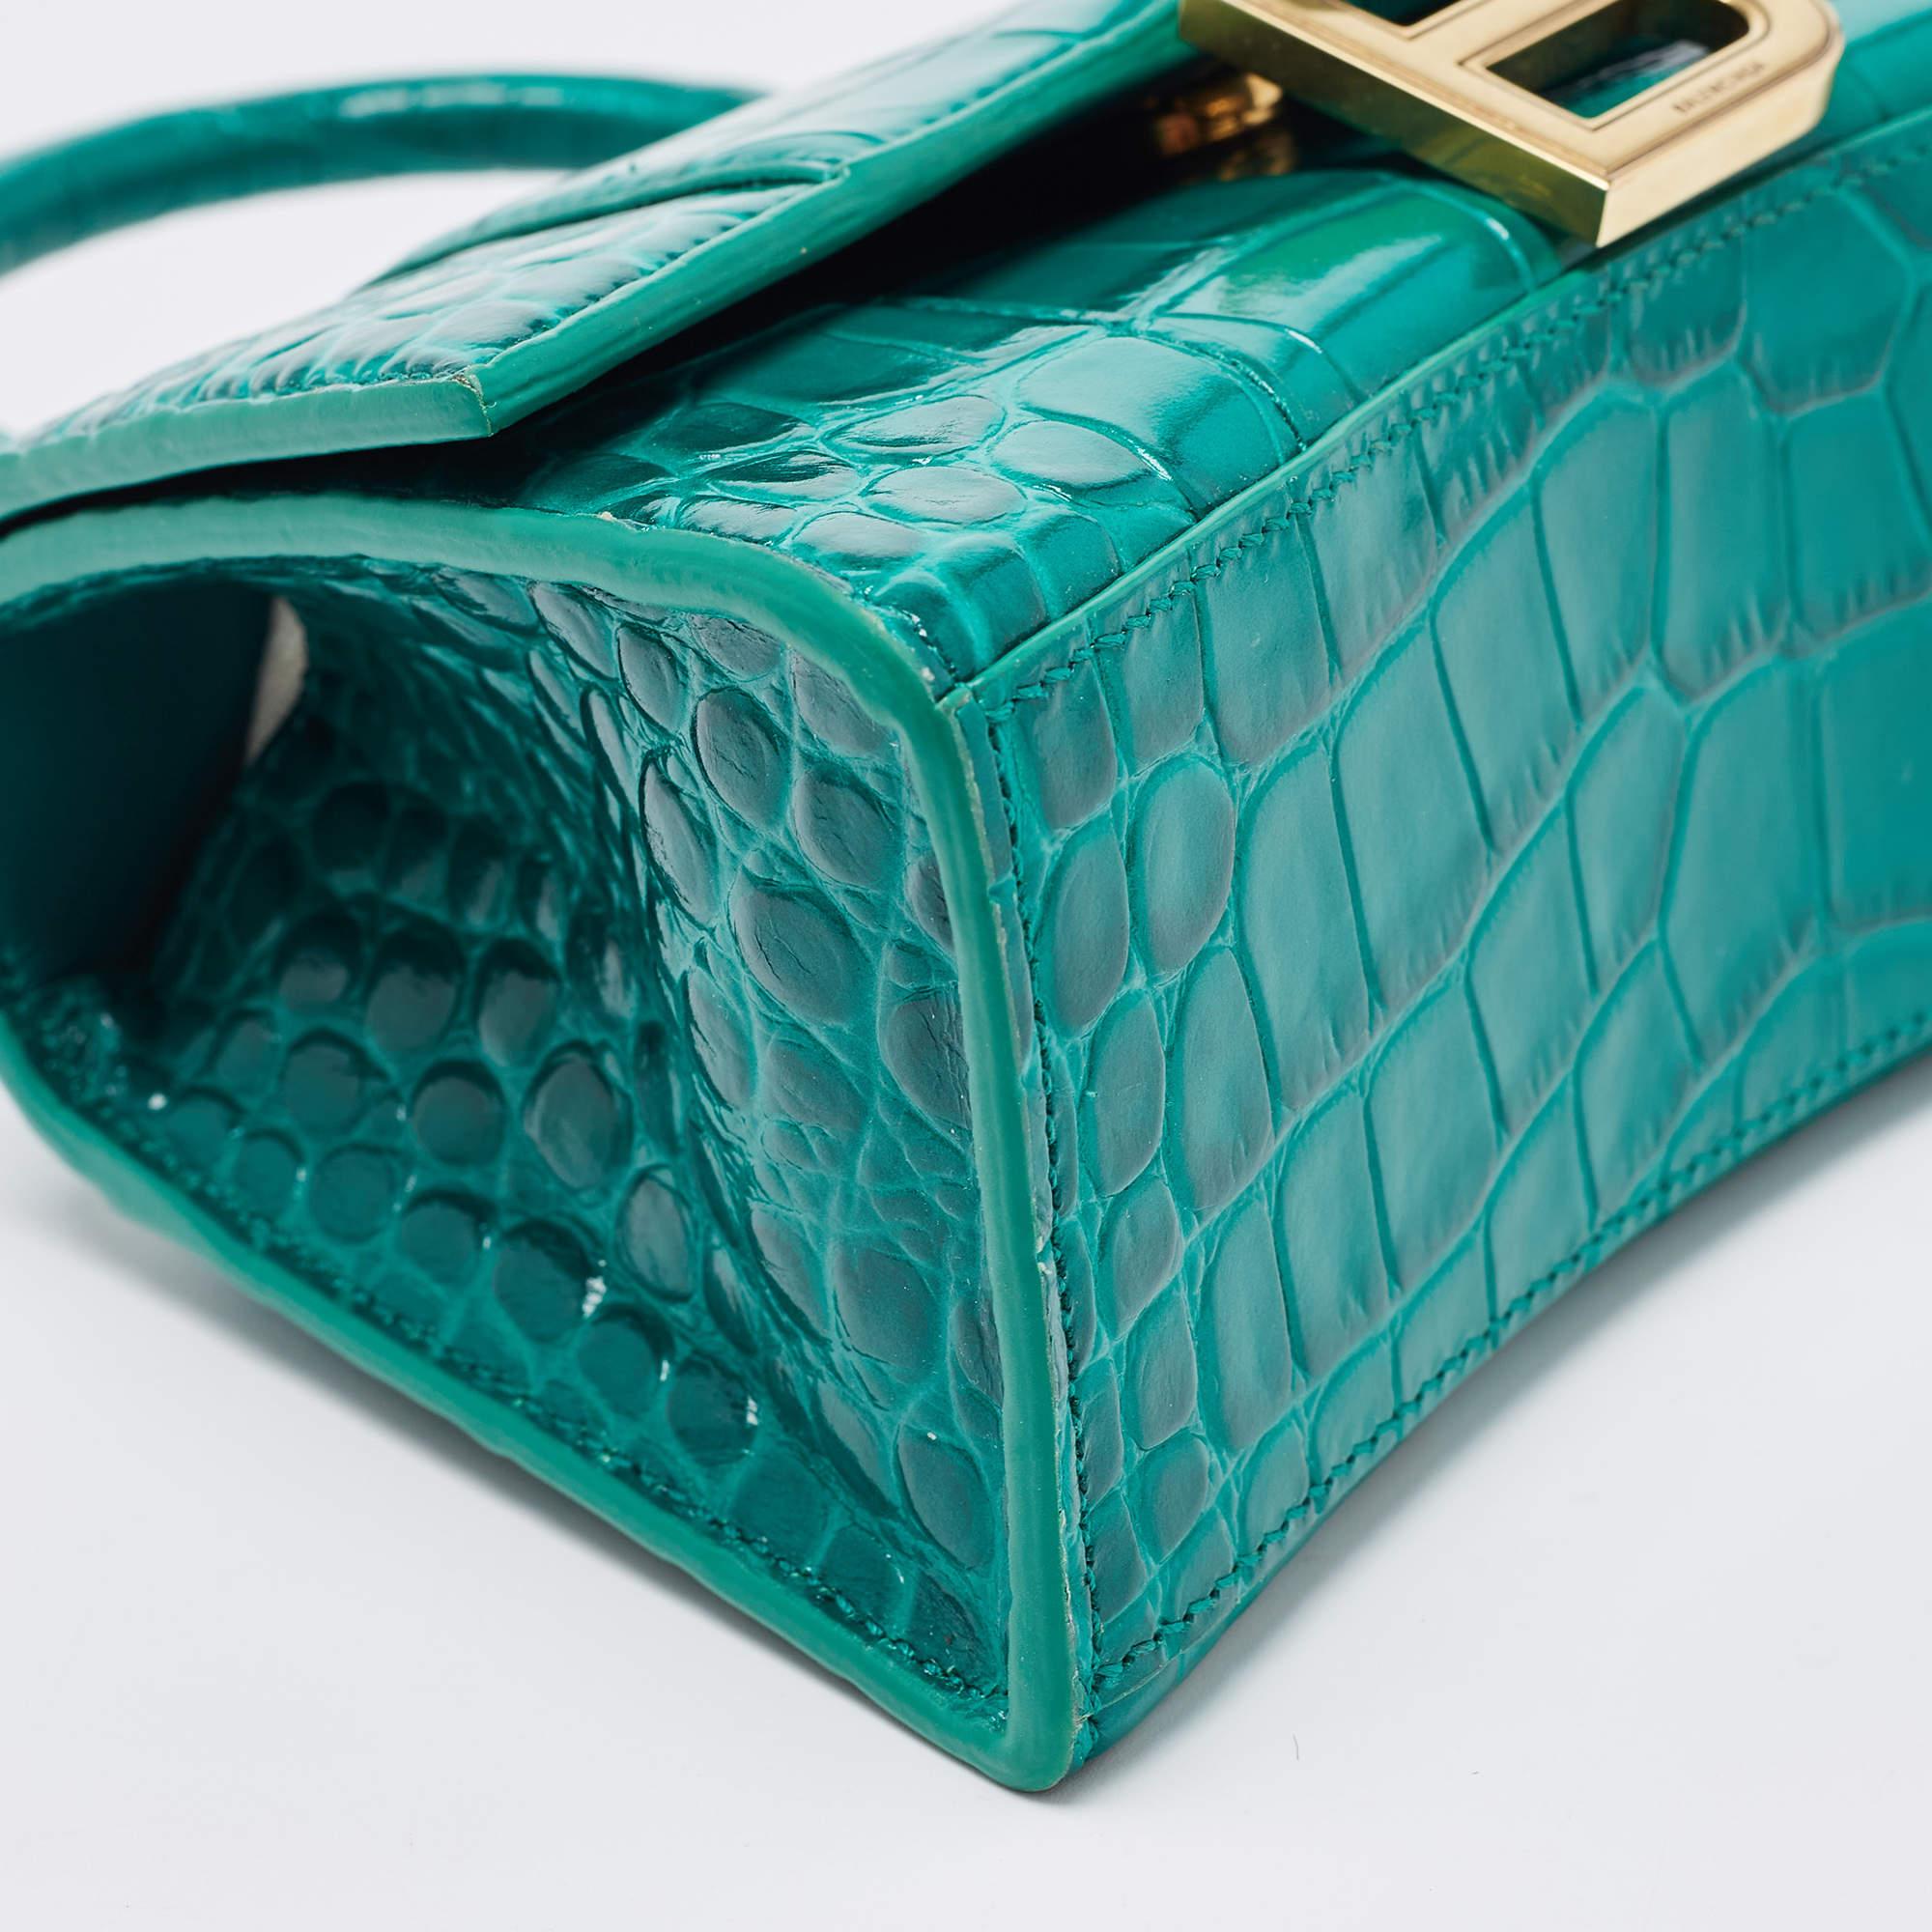 Balenciaga Green Croc Embossed Leather XS Hourglass Top Handle Bag For Sale 7